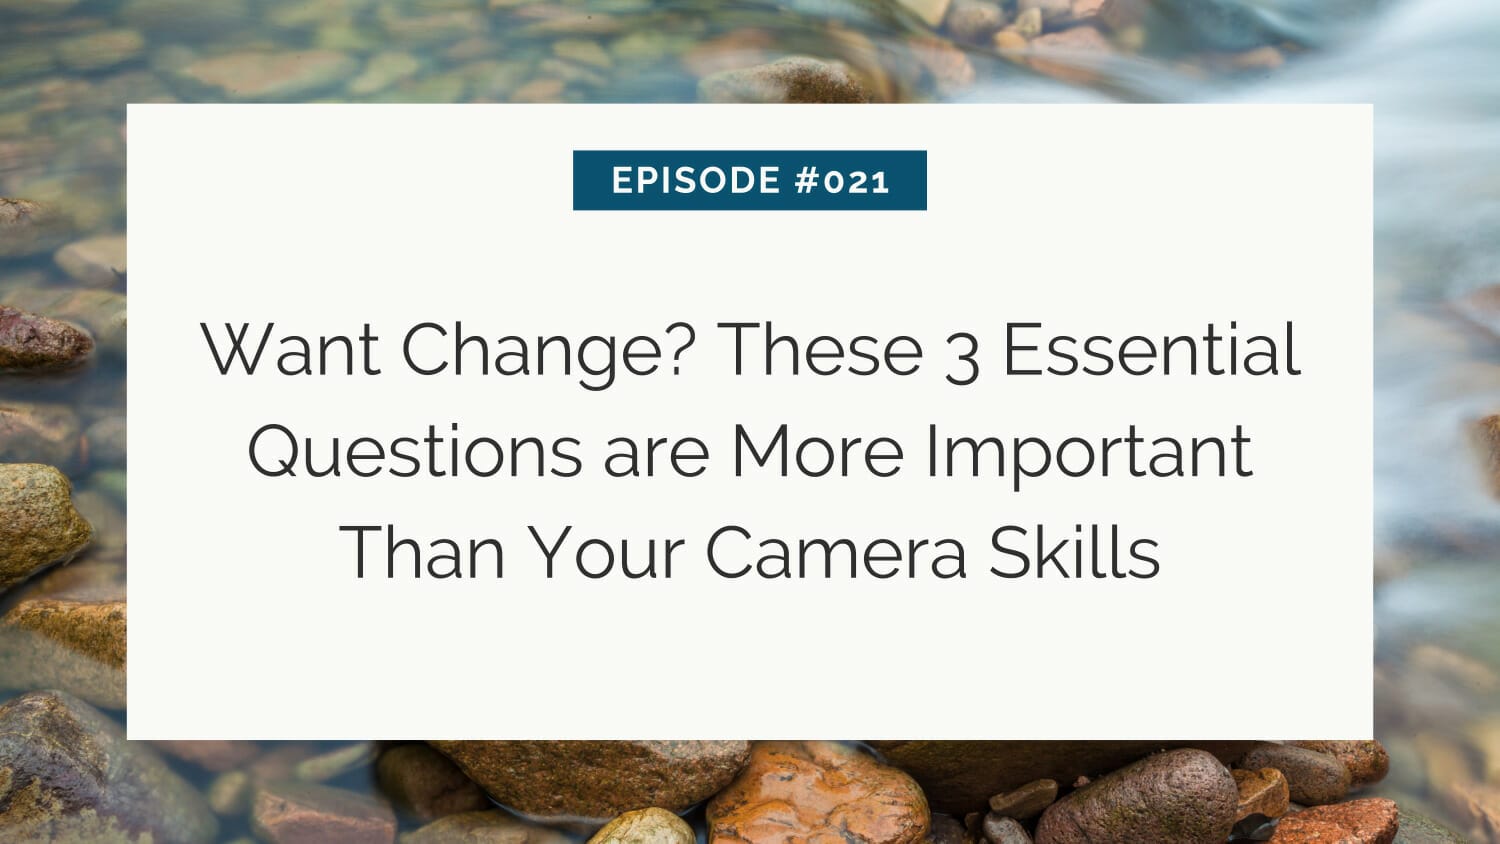 Promotional graphic for episode 021 discussing the importance of certain questions over camera skills for those seeking change.